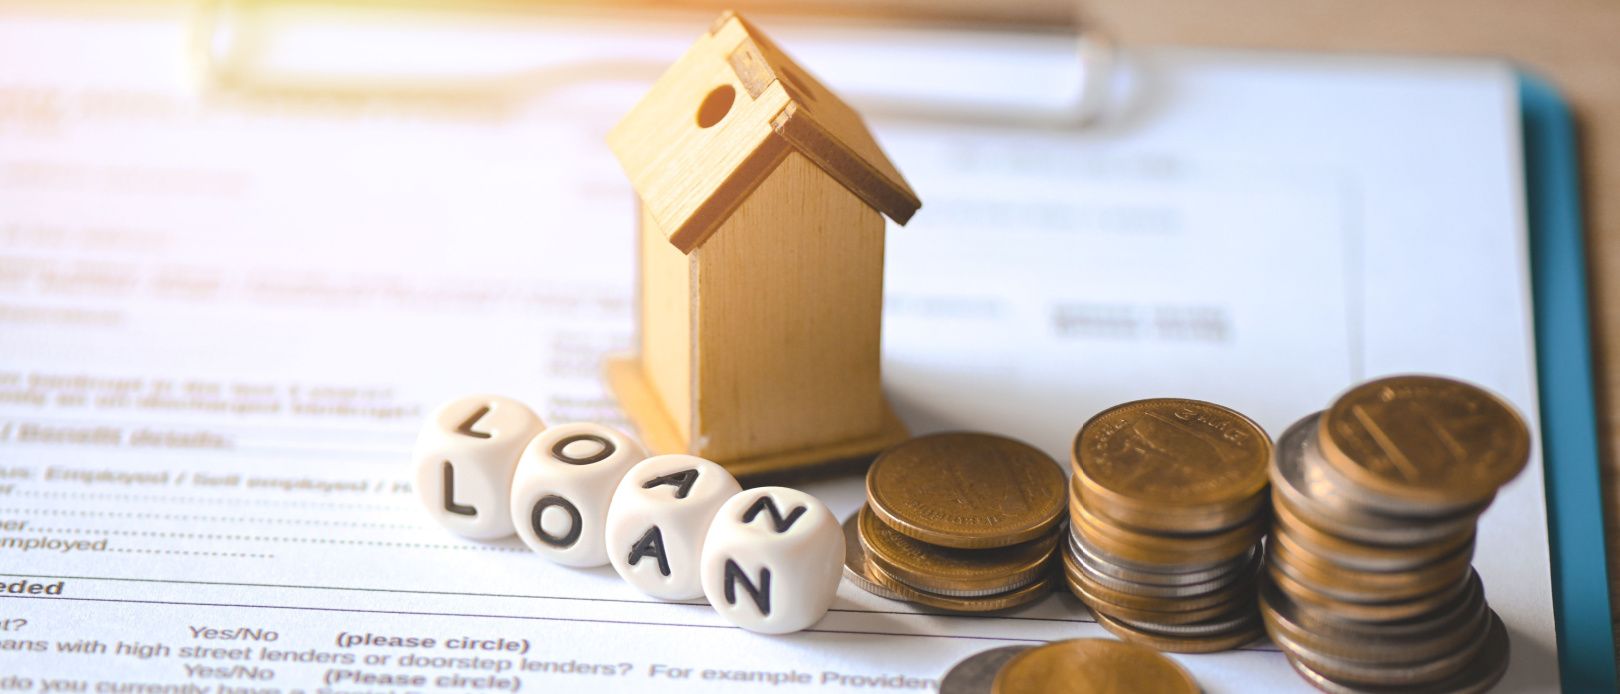 Home loan concept, Loan application form paper with money coin and loan house model on table